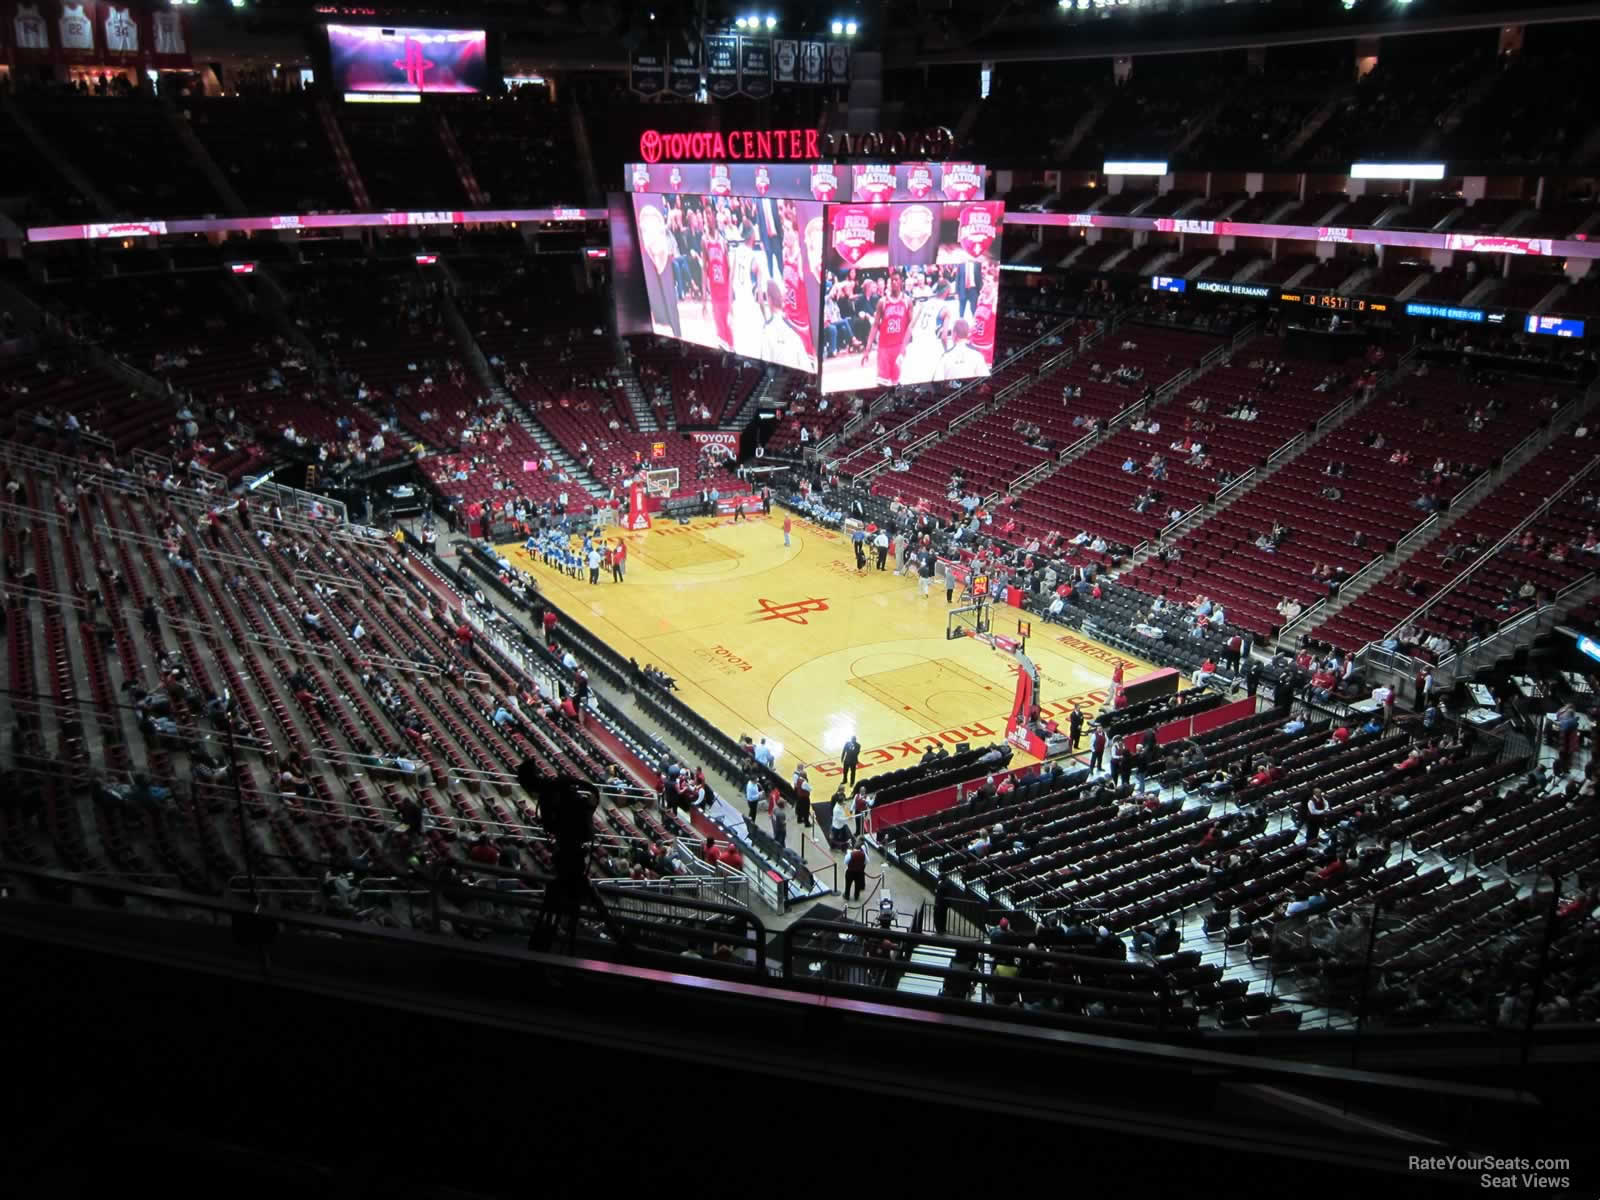 section 404, row 6 seat view  for basketball - toyota center